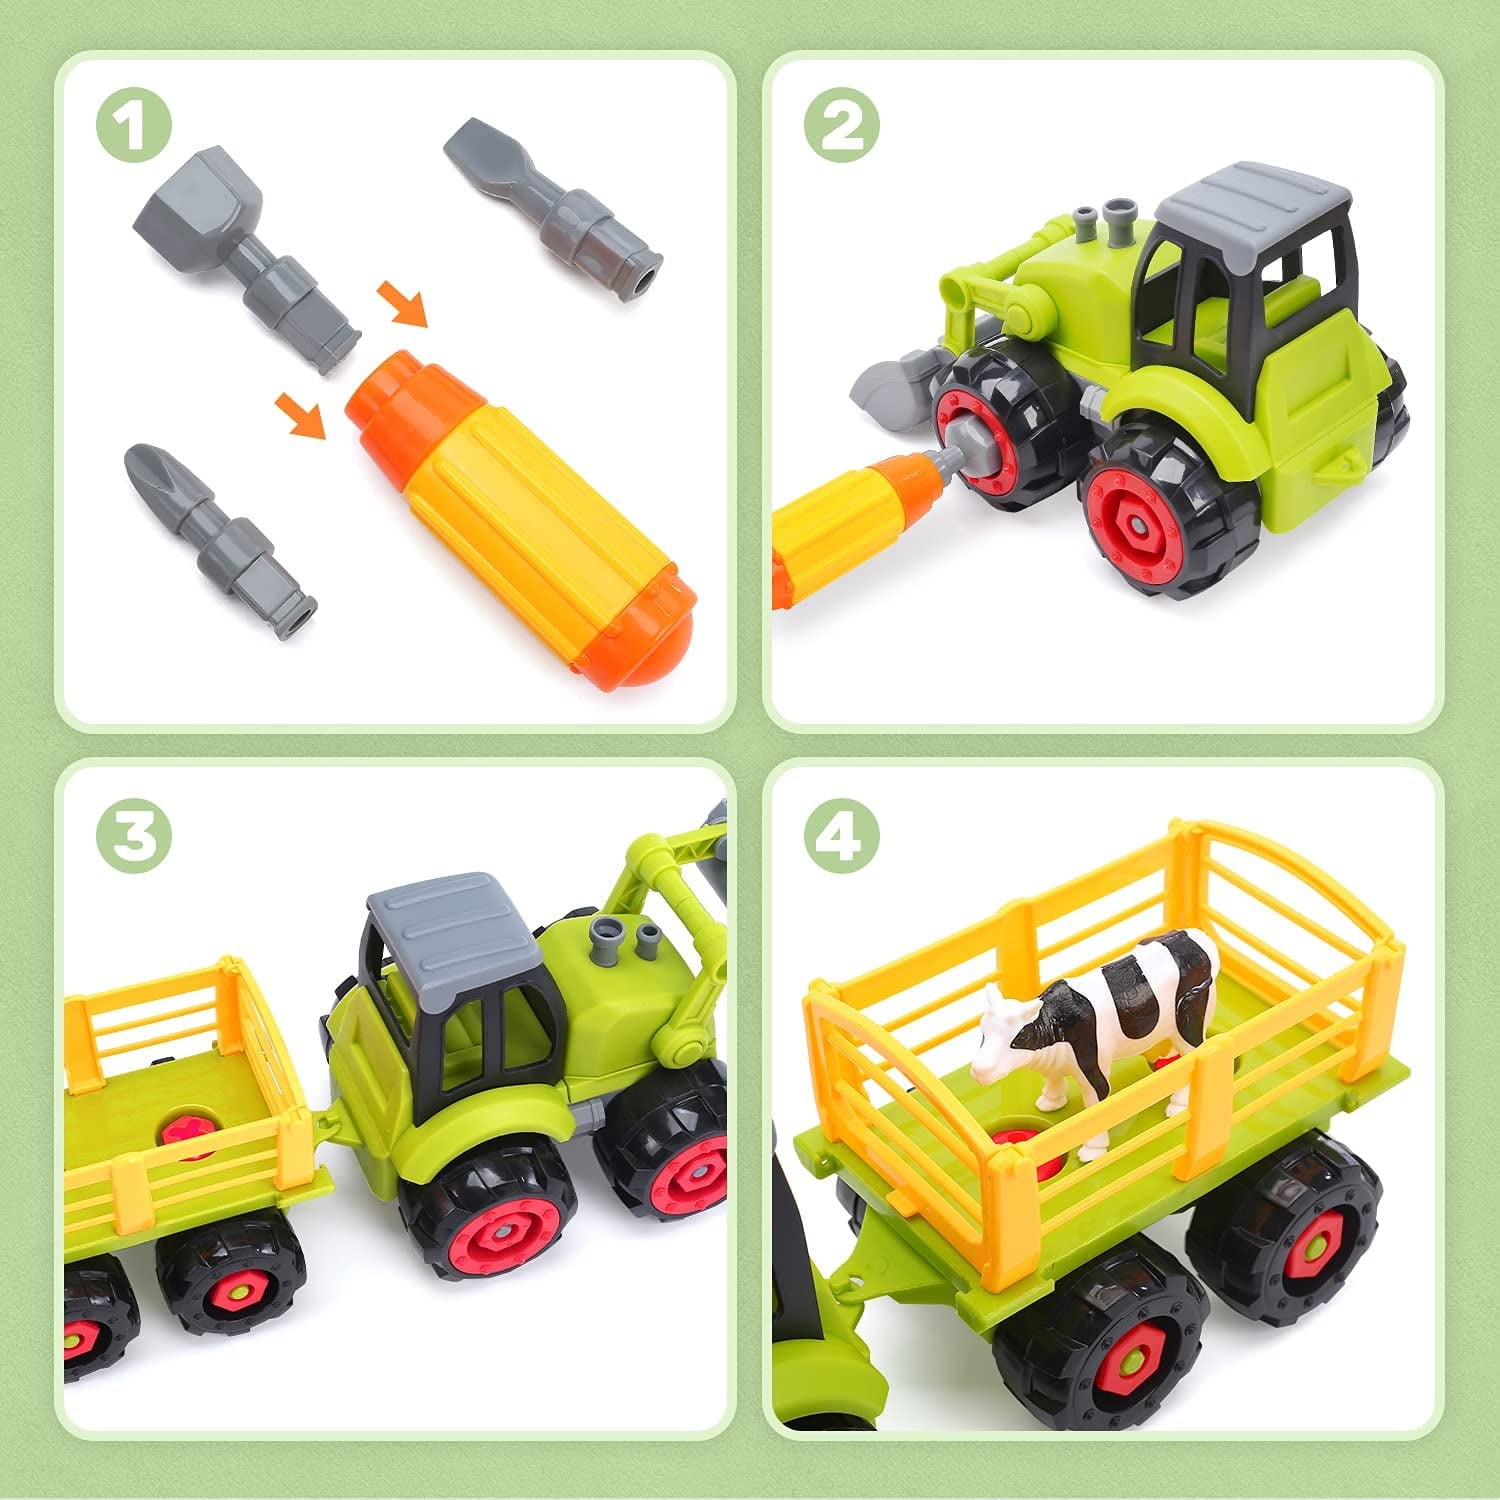 Take Apart Toys Farm Truck Tractor With Electric Drill Play Farm Set For Kids US 